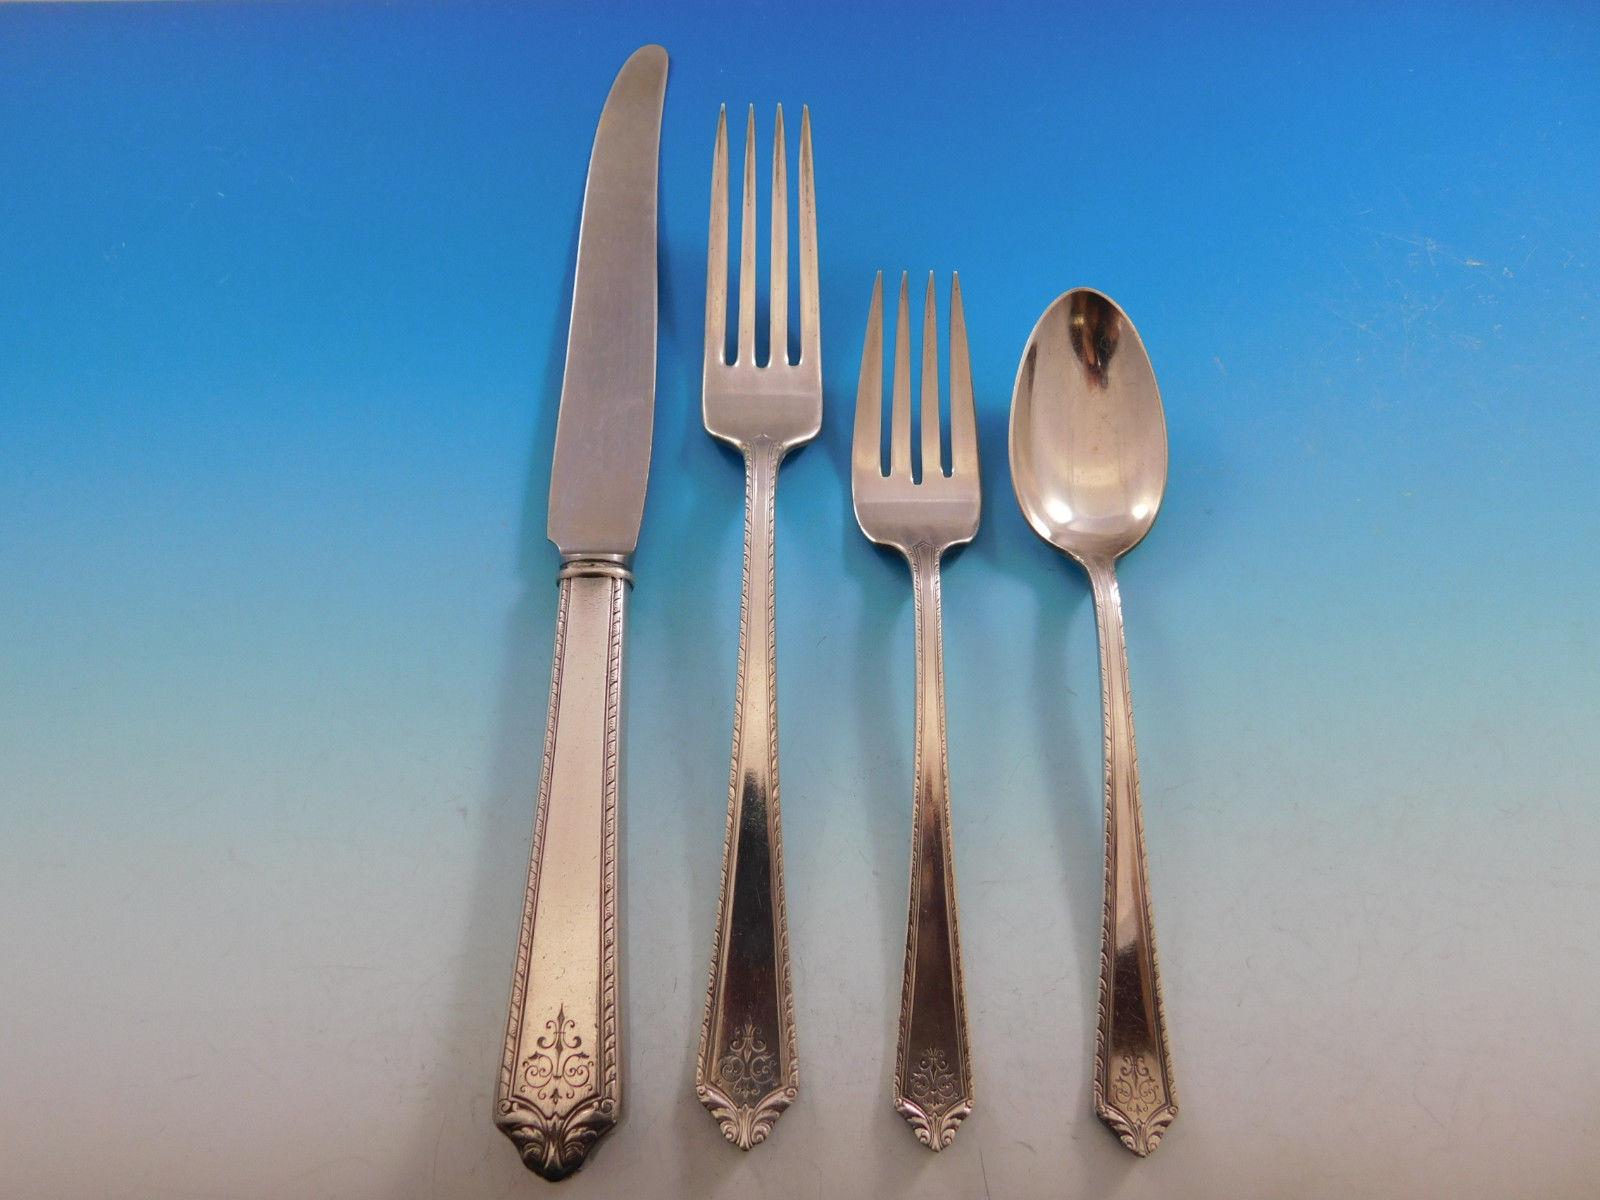 holmes and edwards silverware